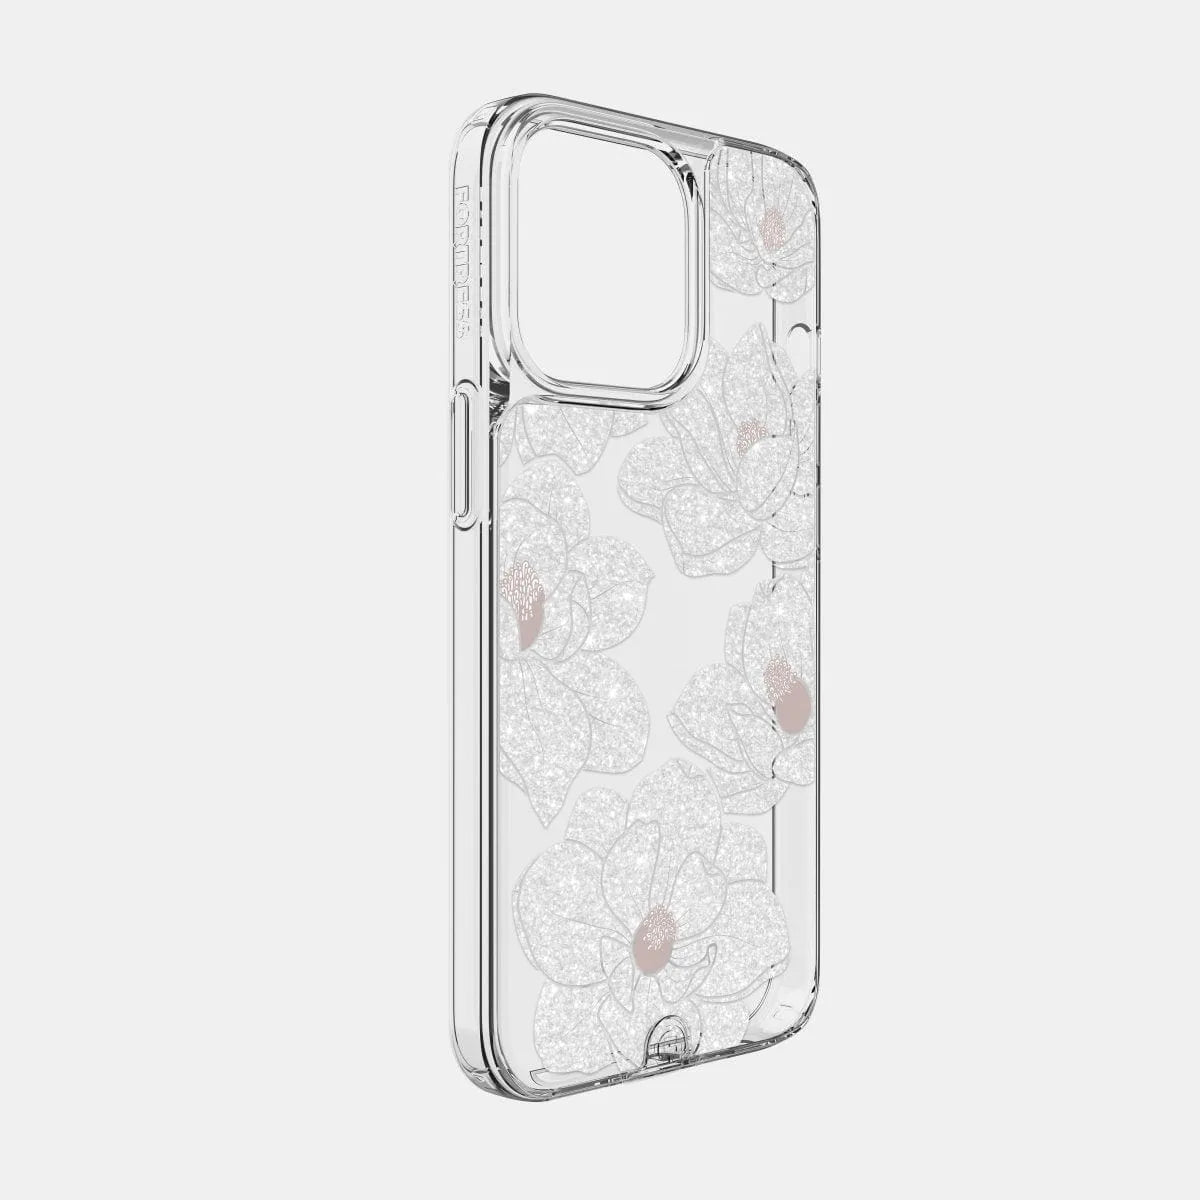 Fortress Swipe Style Inserts (Floral Forms Collection) for iPhone 13 Pro Max Infinite Glass Case  Scooch Infinite Glass